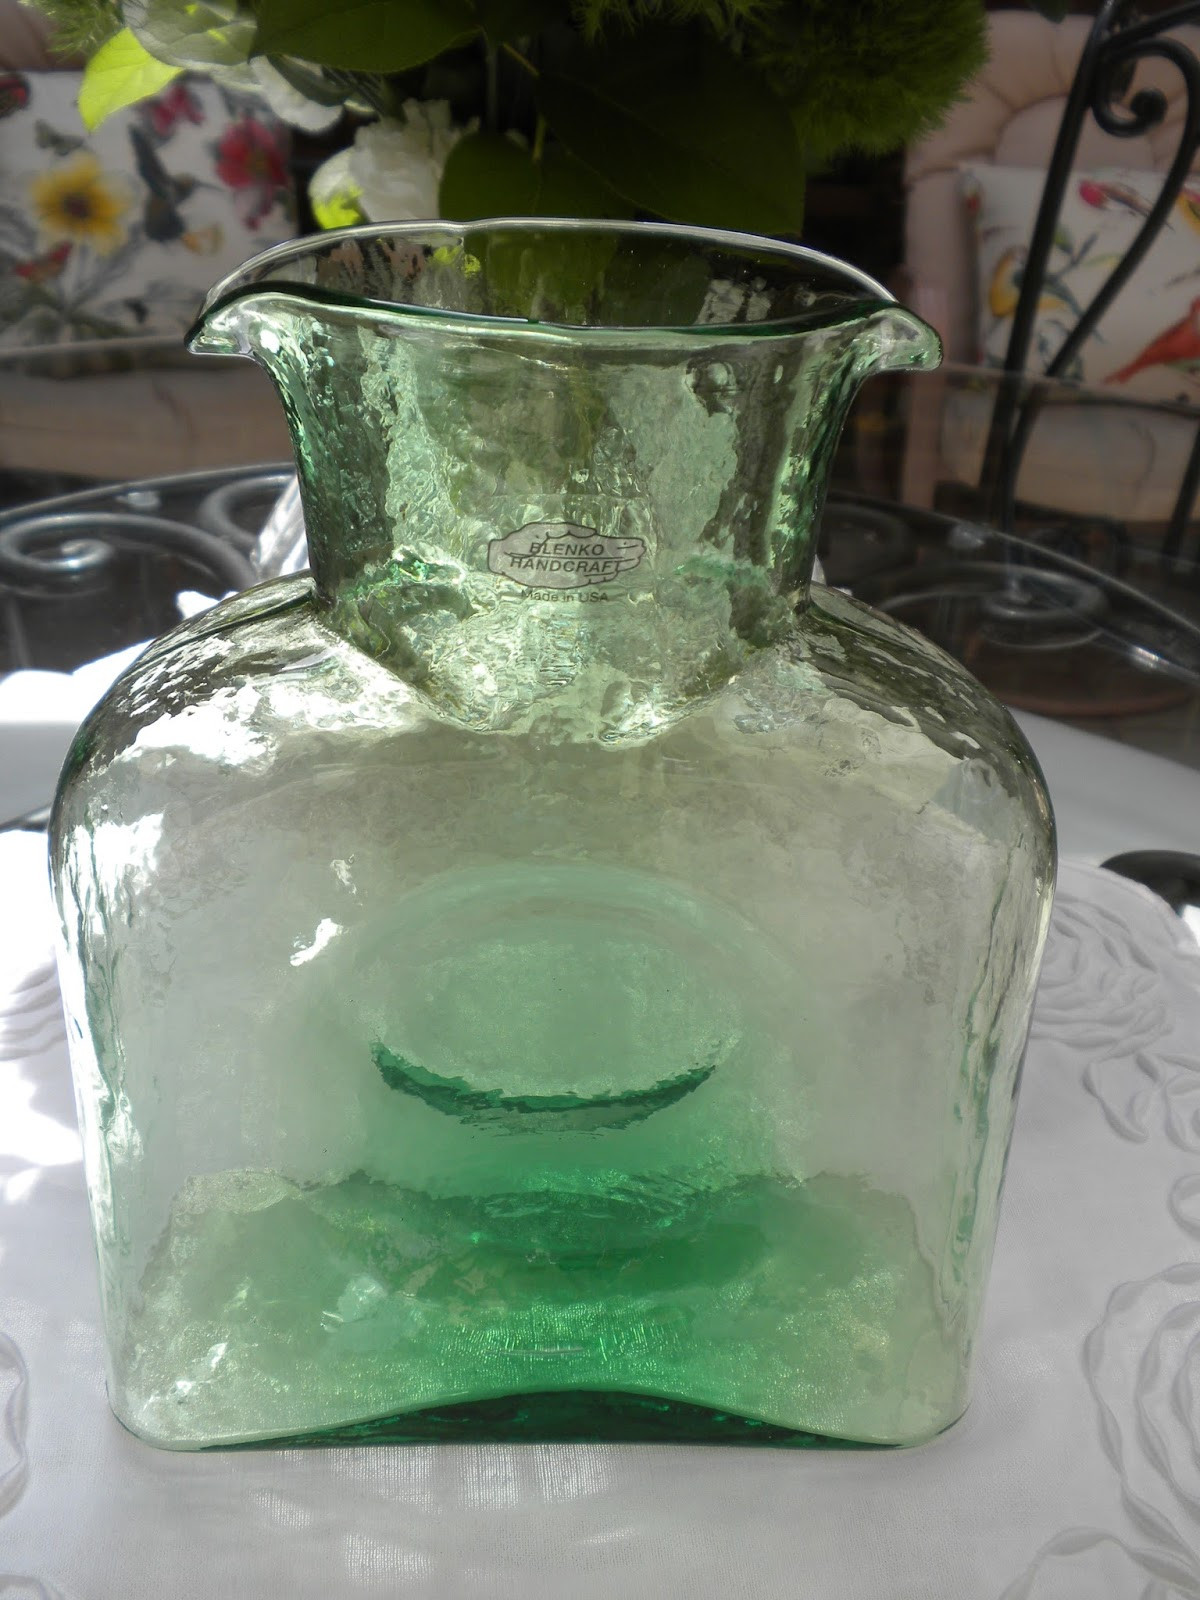 blenko handcraft vase of panoply recent blenko glass purchases throughout the second item i bought was a paper bag vase this is a color fade of bermuda blue and spring green it is 8 5 high the waves you see midway through are